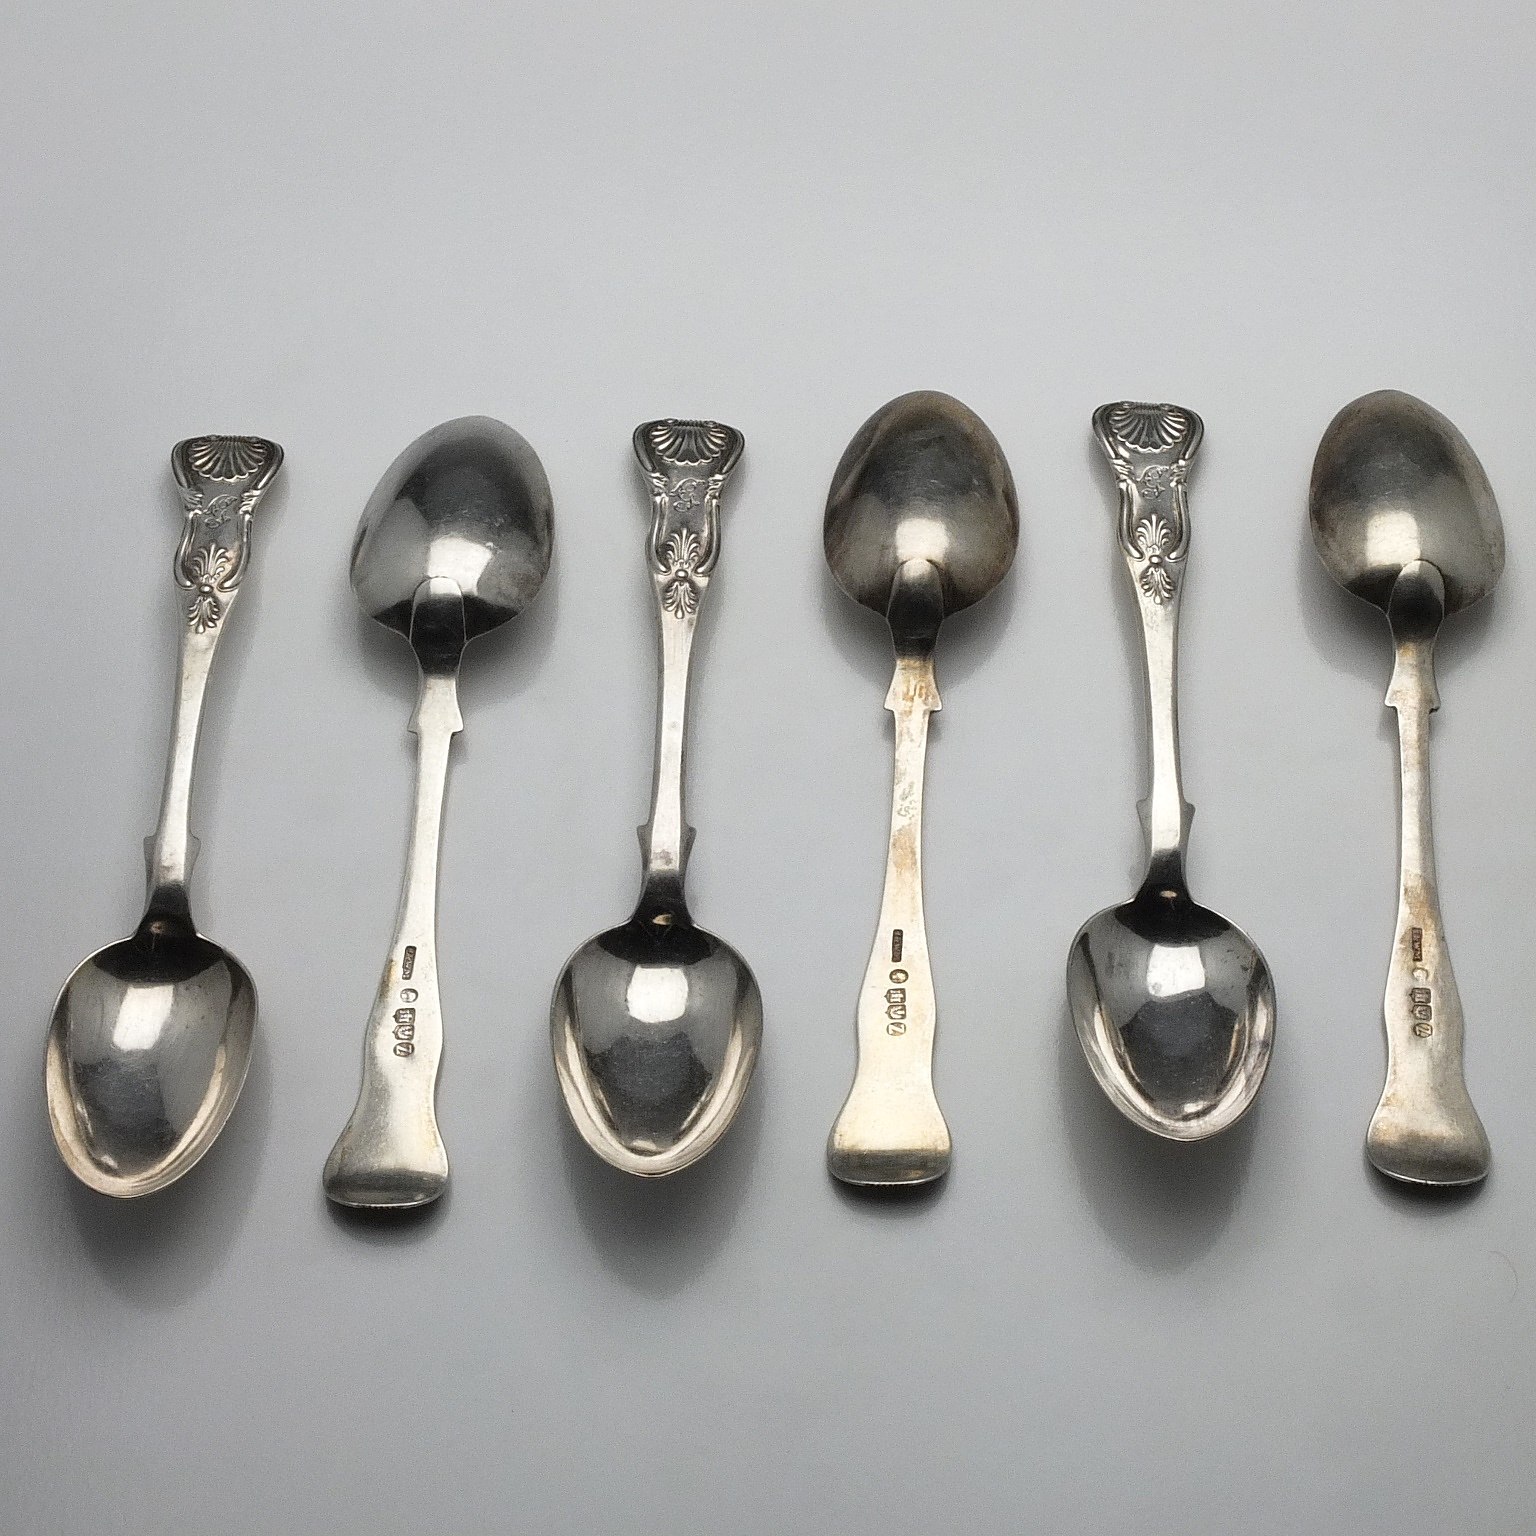 'Six Victorian Crested Sterling Silver Kings Pattern Spoons James & Walter Marshall London 1856'